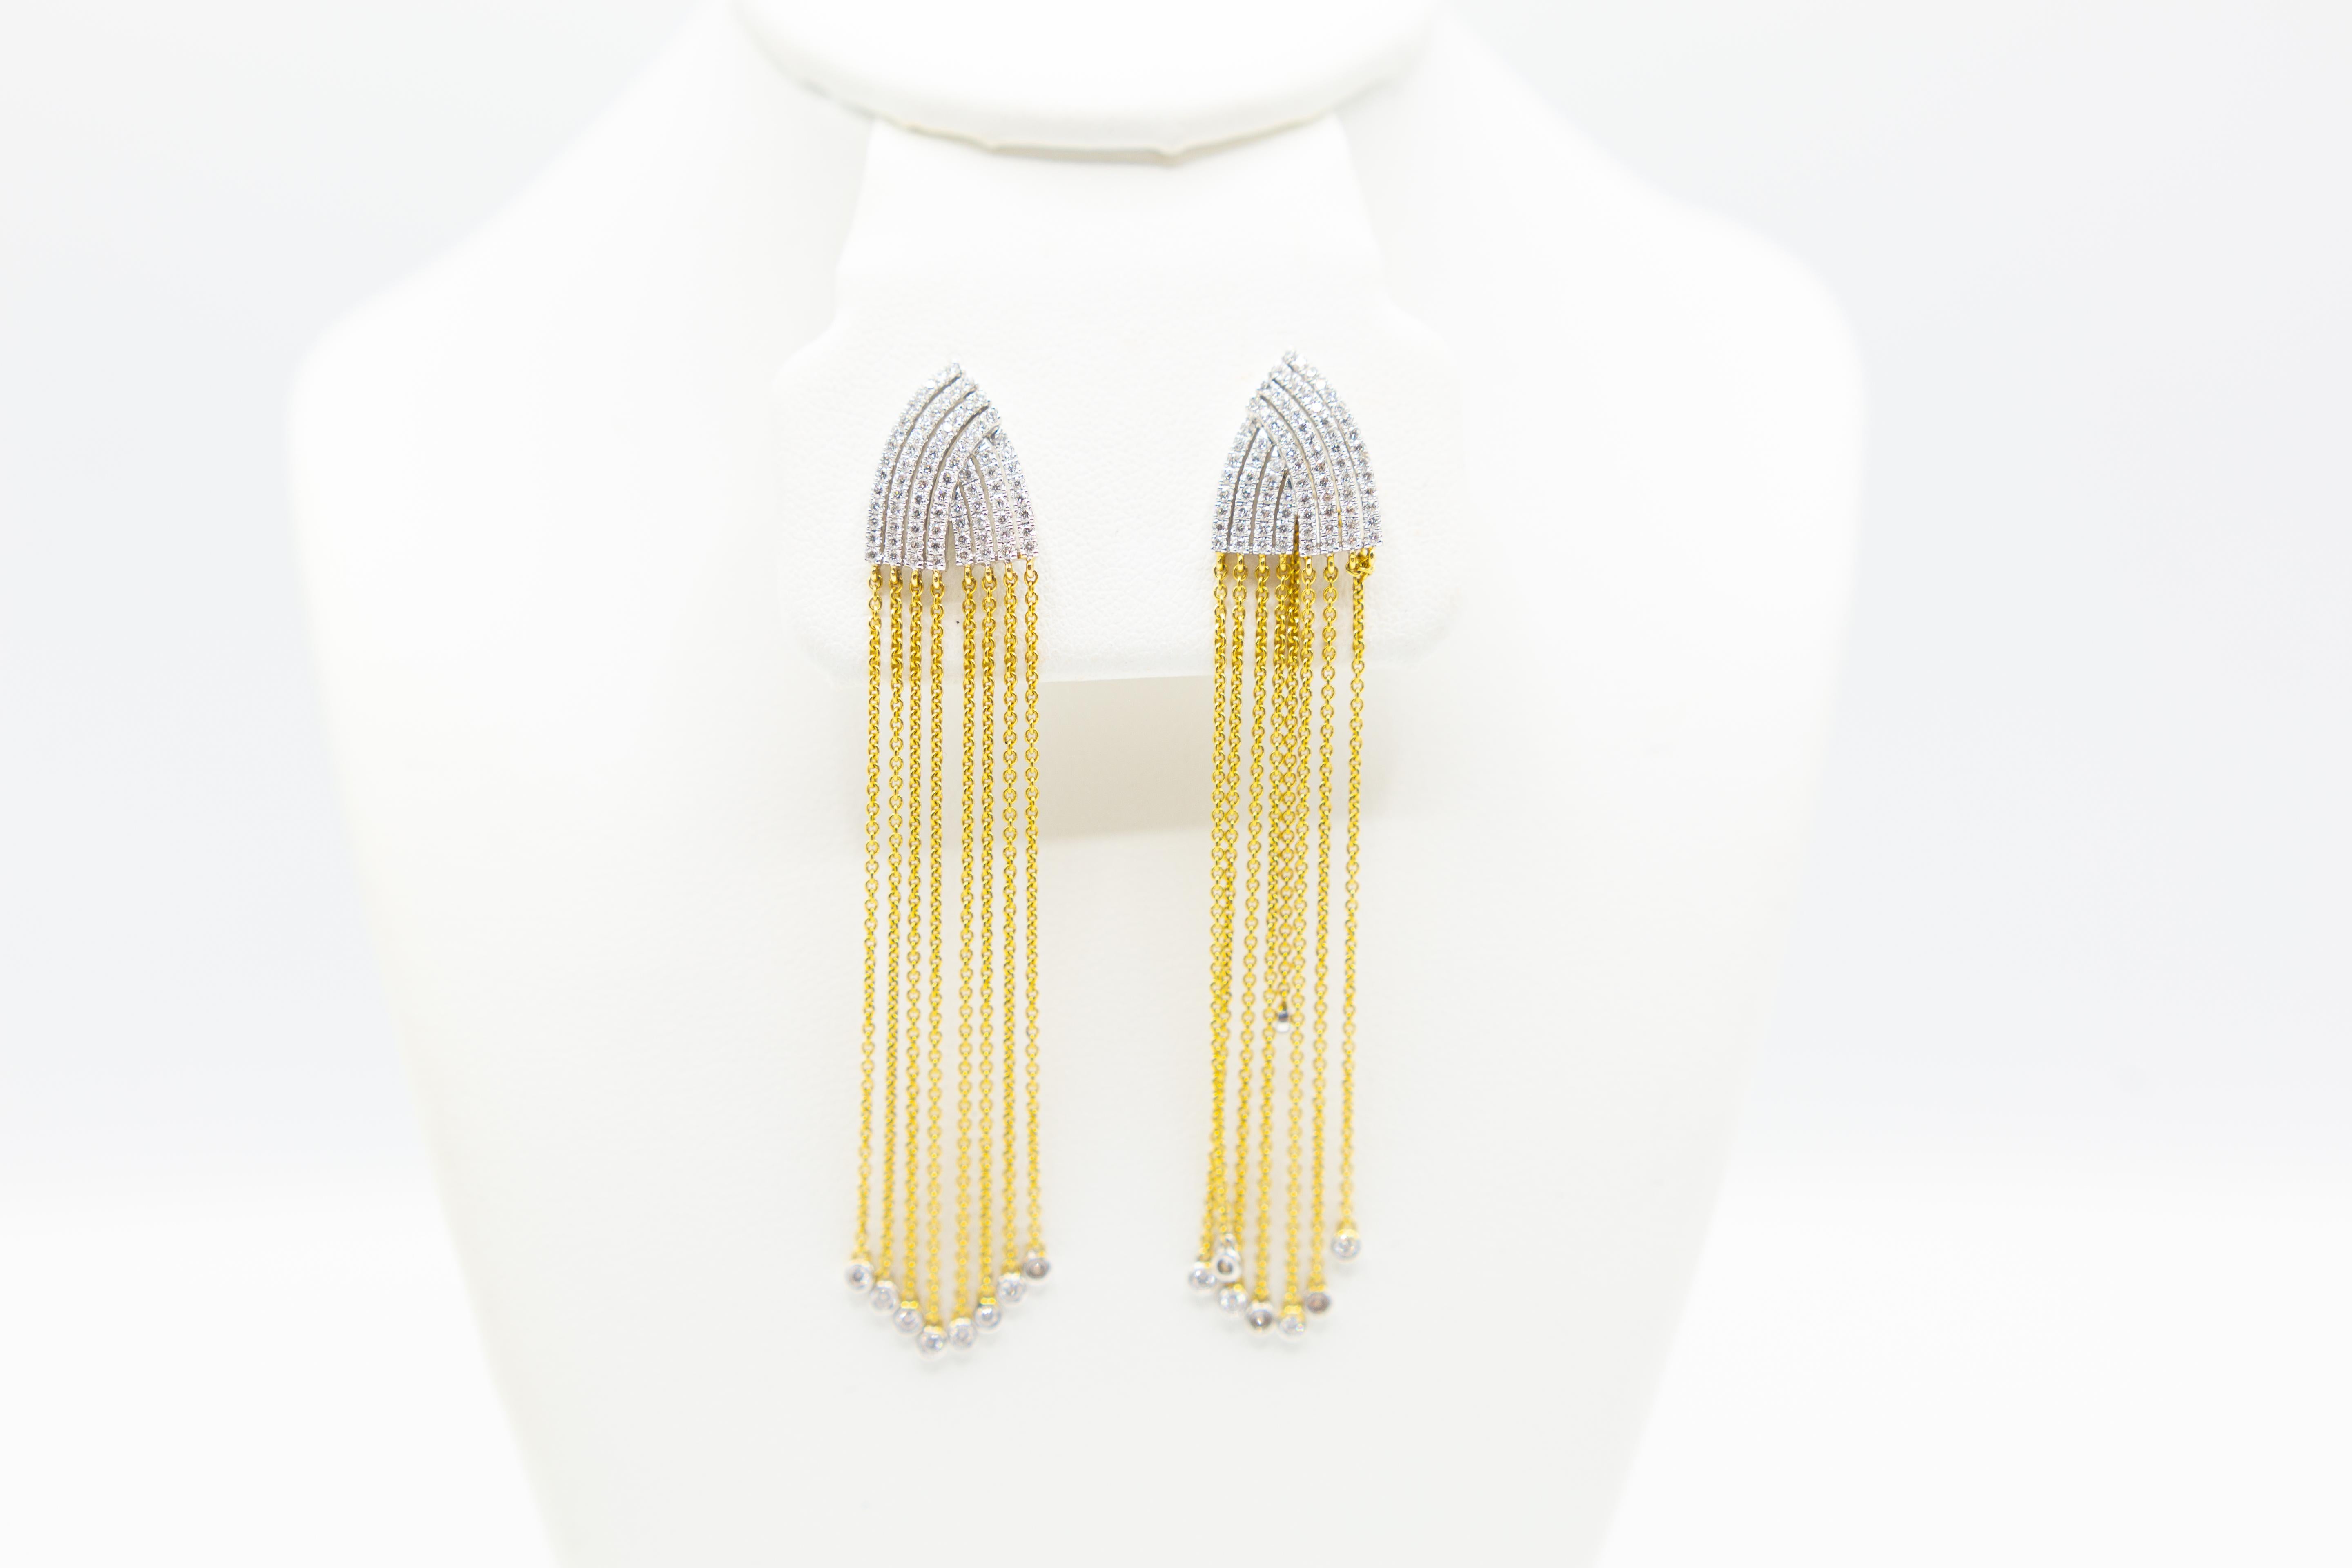 Fringe Diamond Drop Earrings 18 Karat Yellow and White Gold In Excellent Condition For Sale In Houston, TX